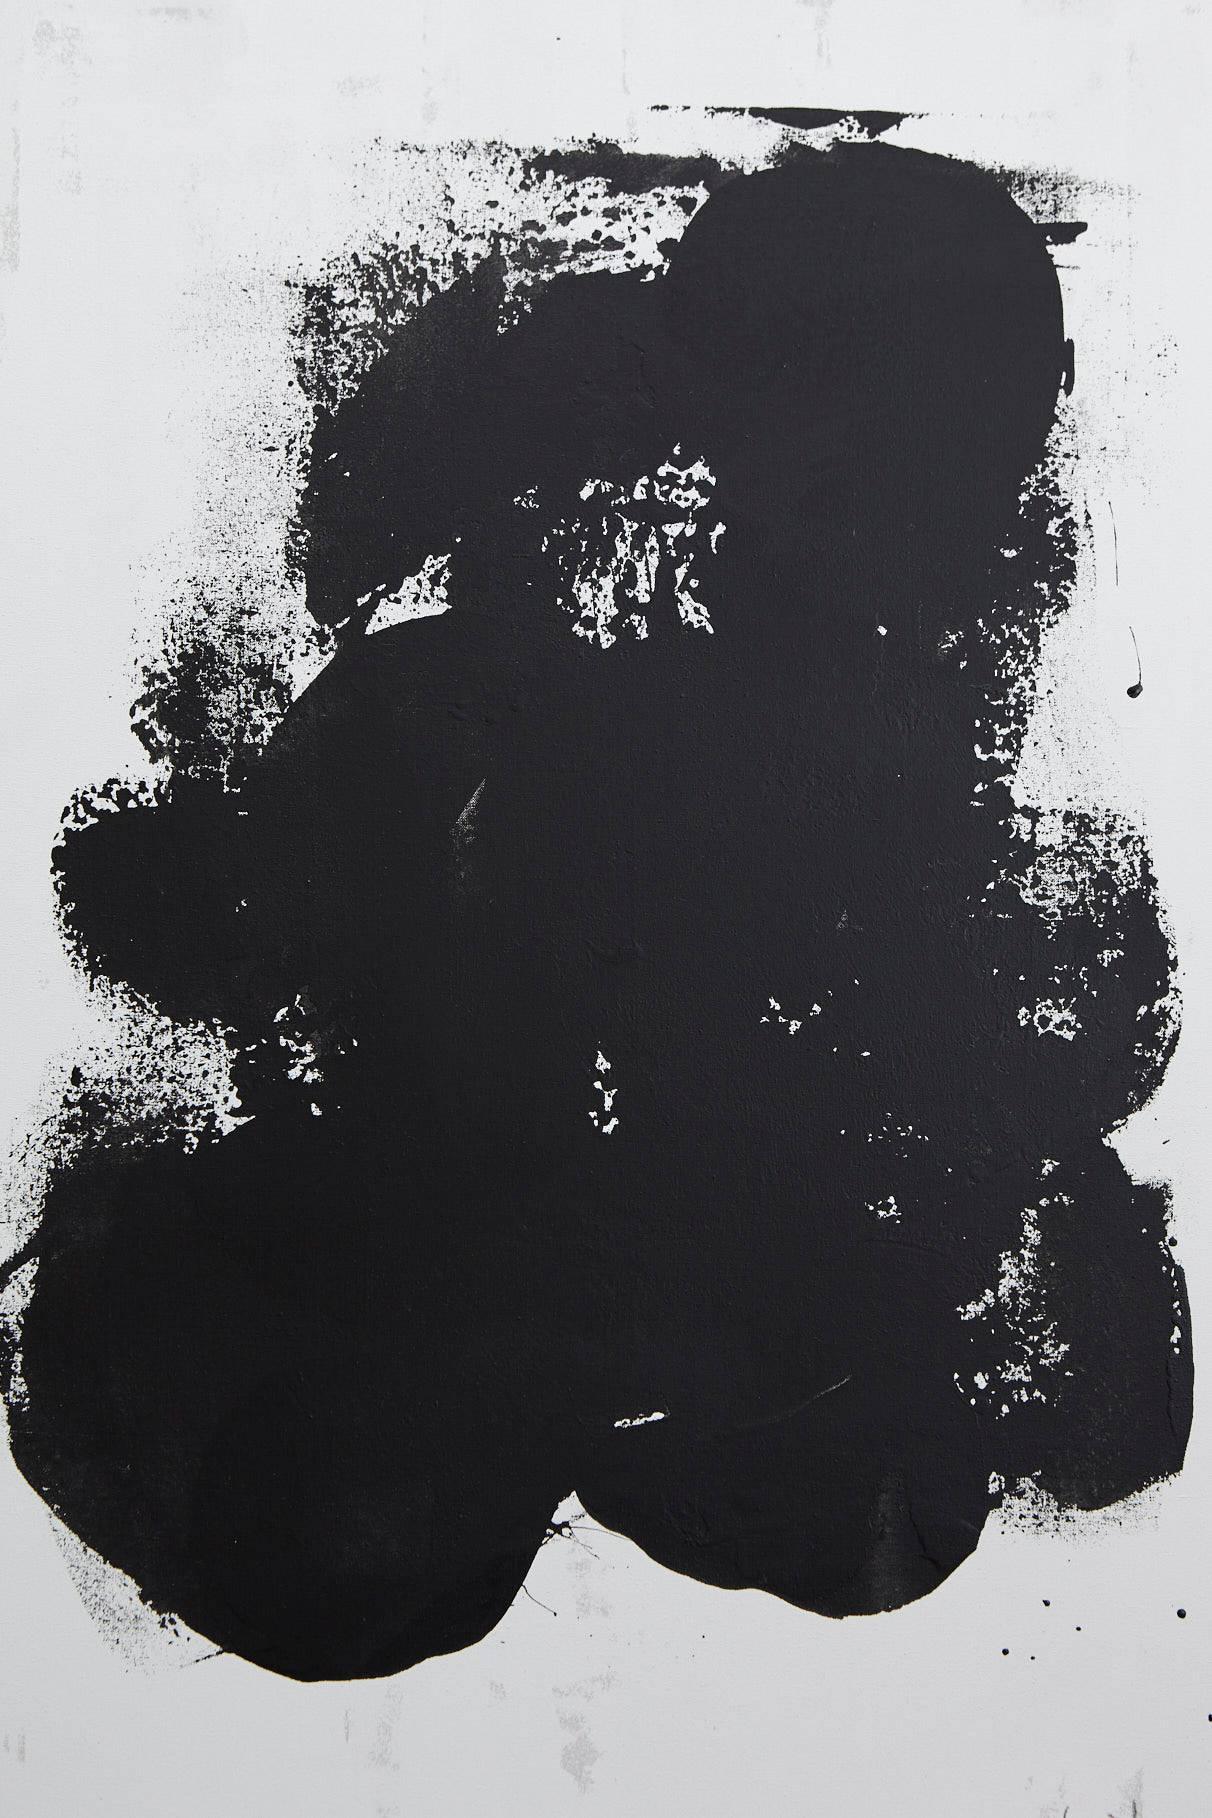 Black Movement On White I - Painting by Hilmar Meyer-Bosse